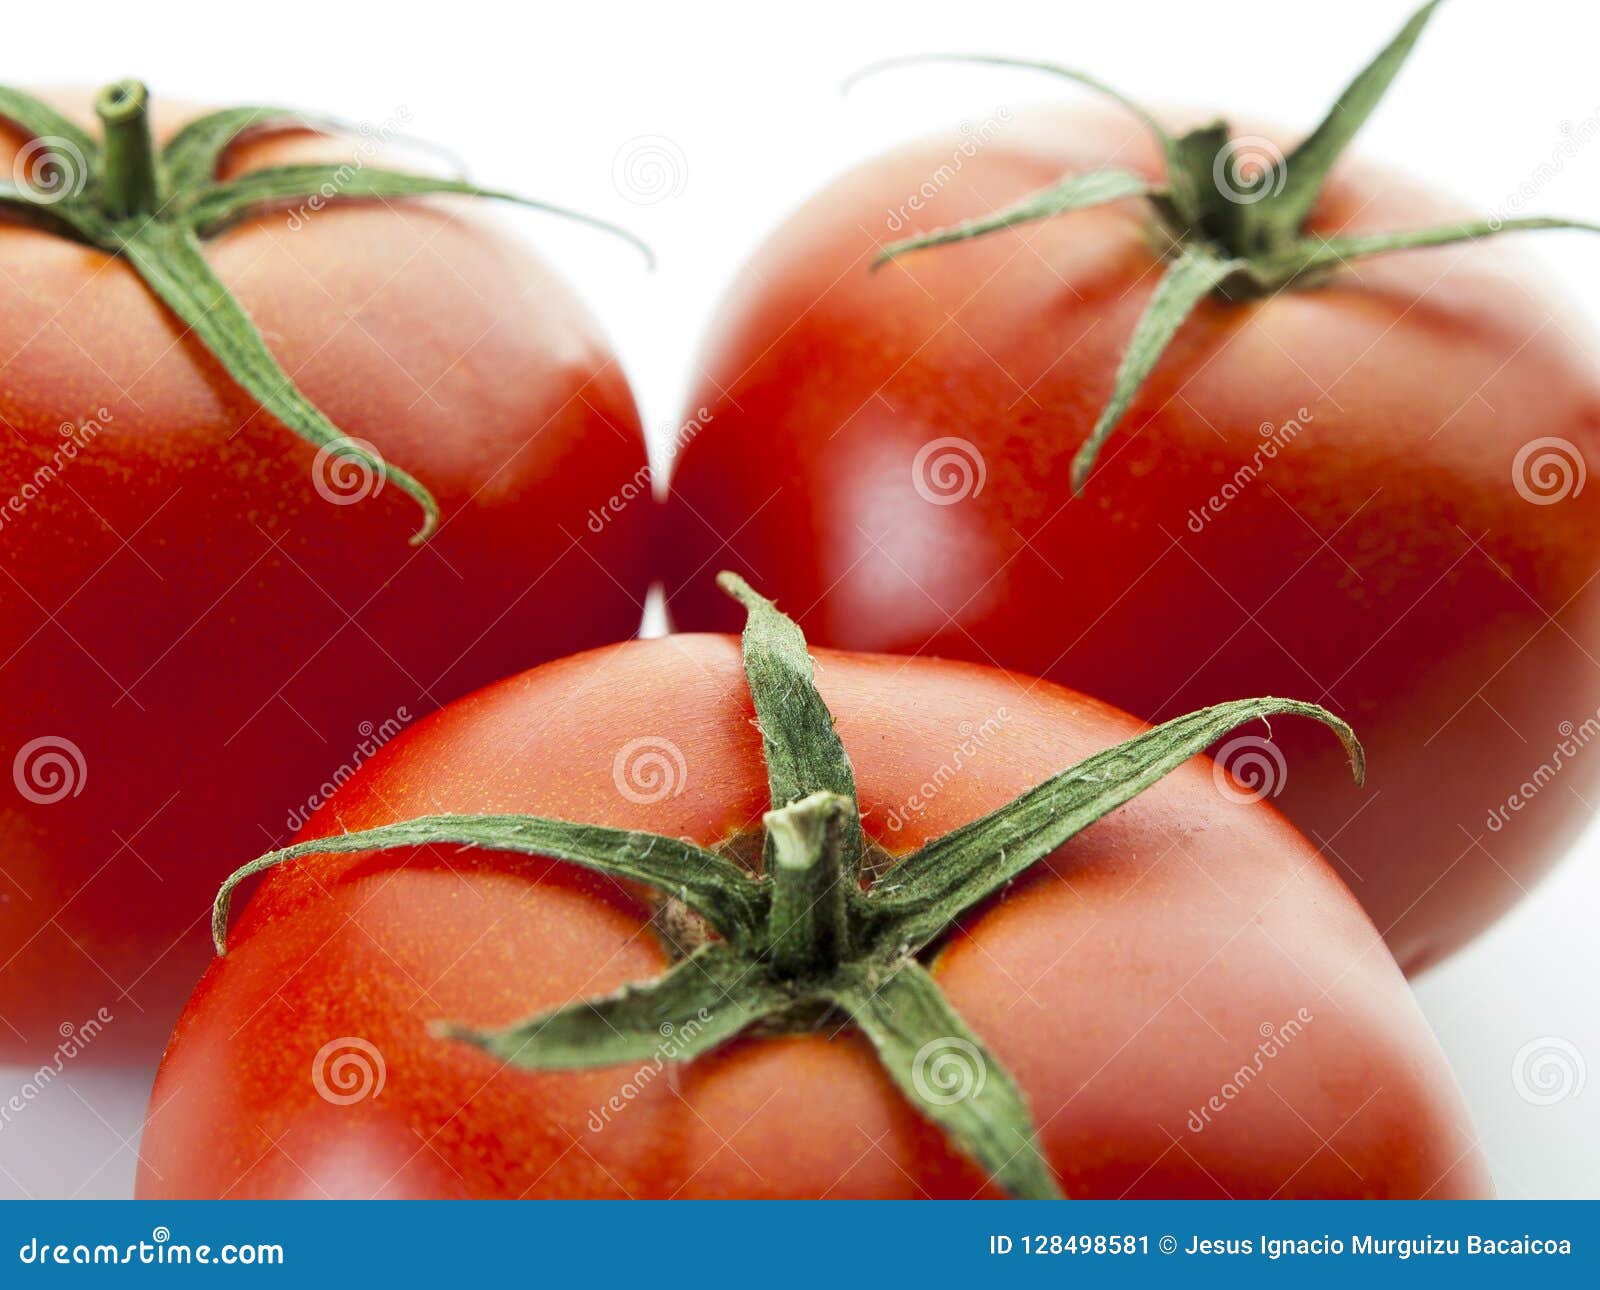 top view of three red tomatoes on a white background